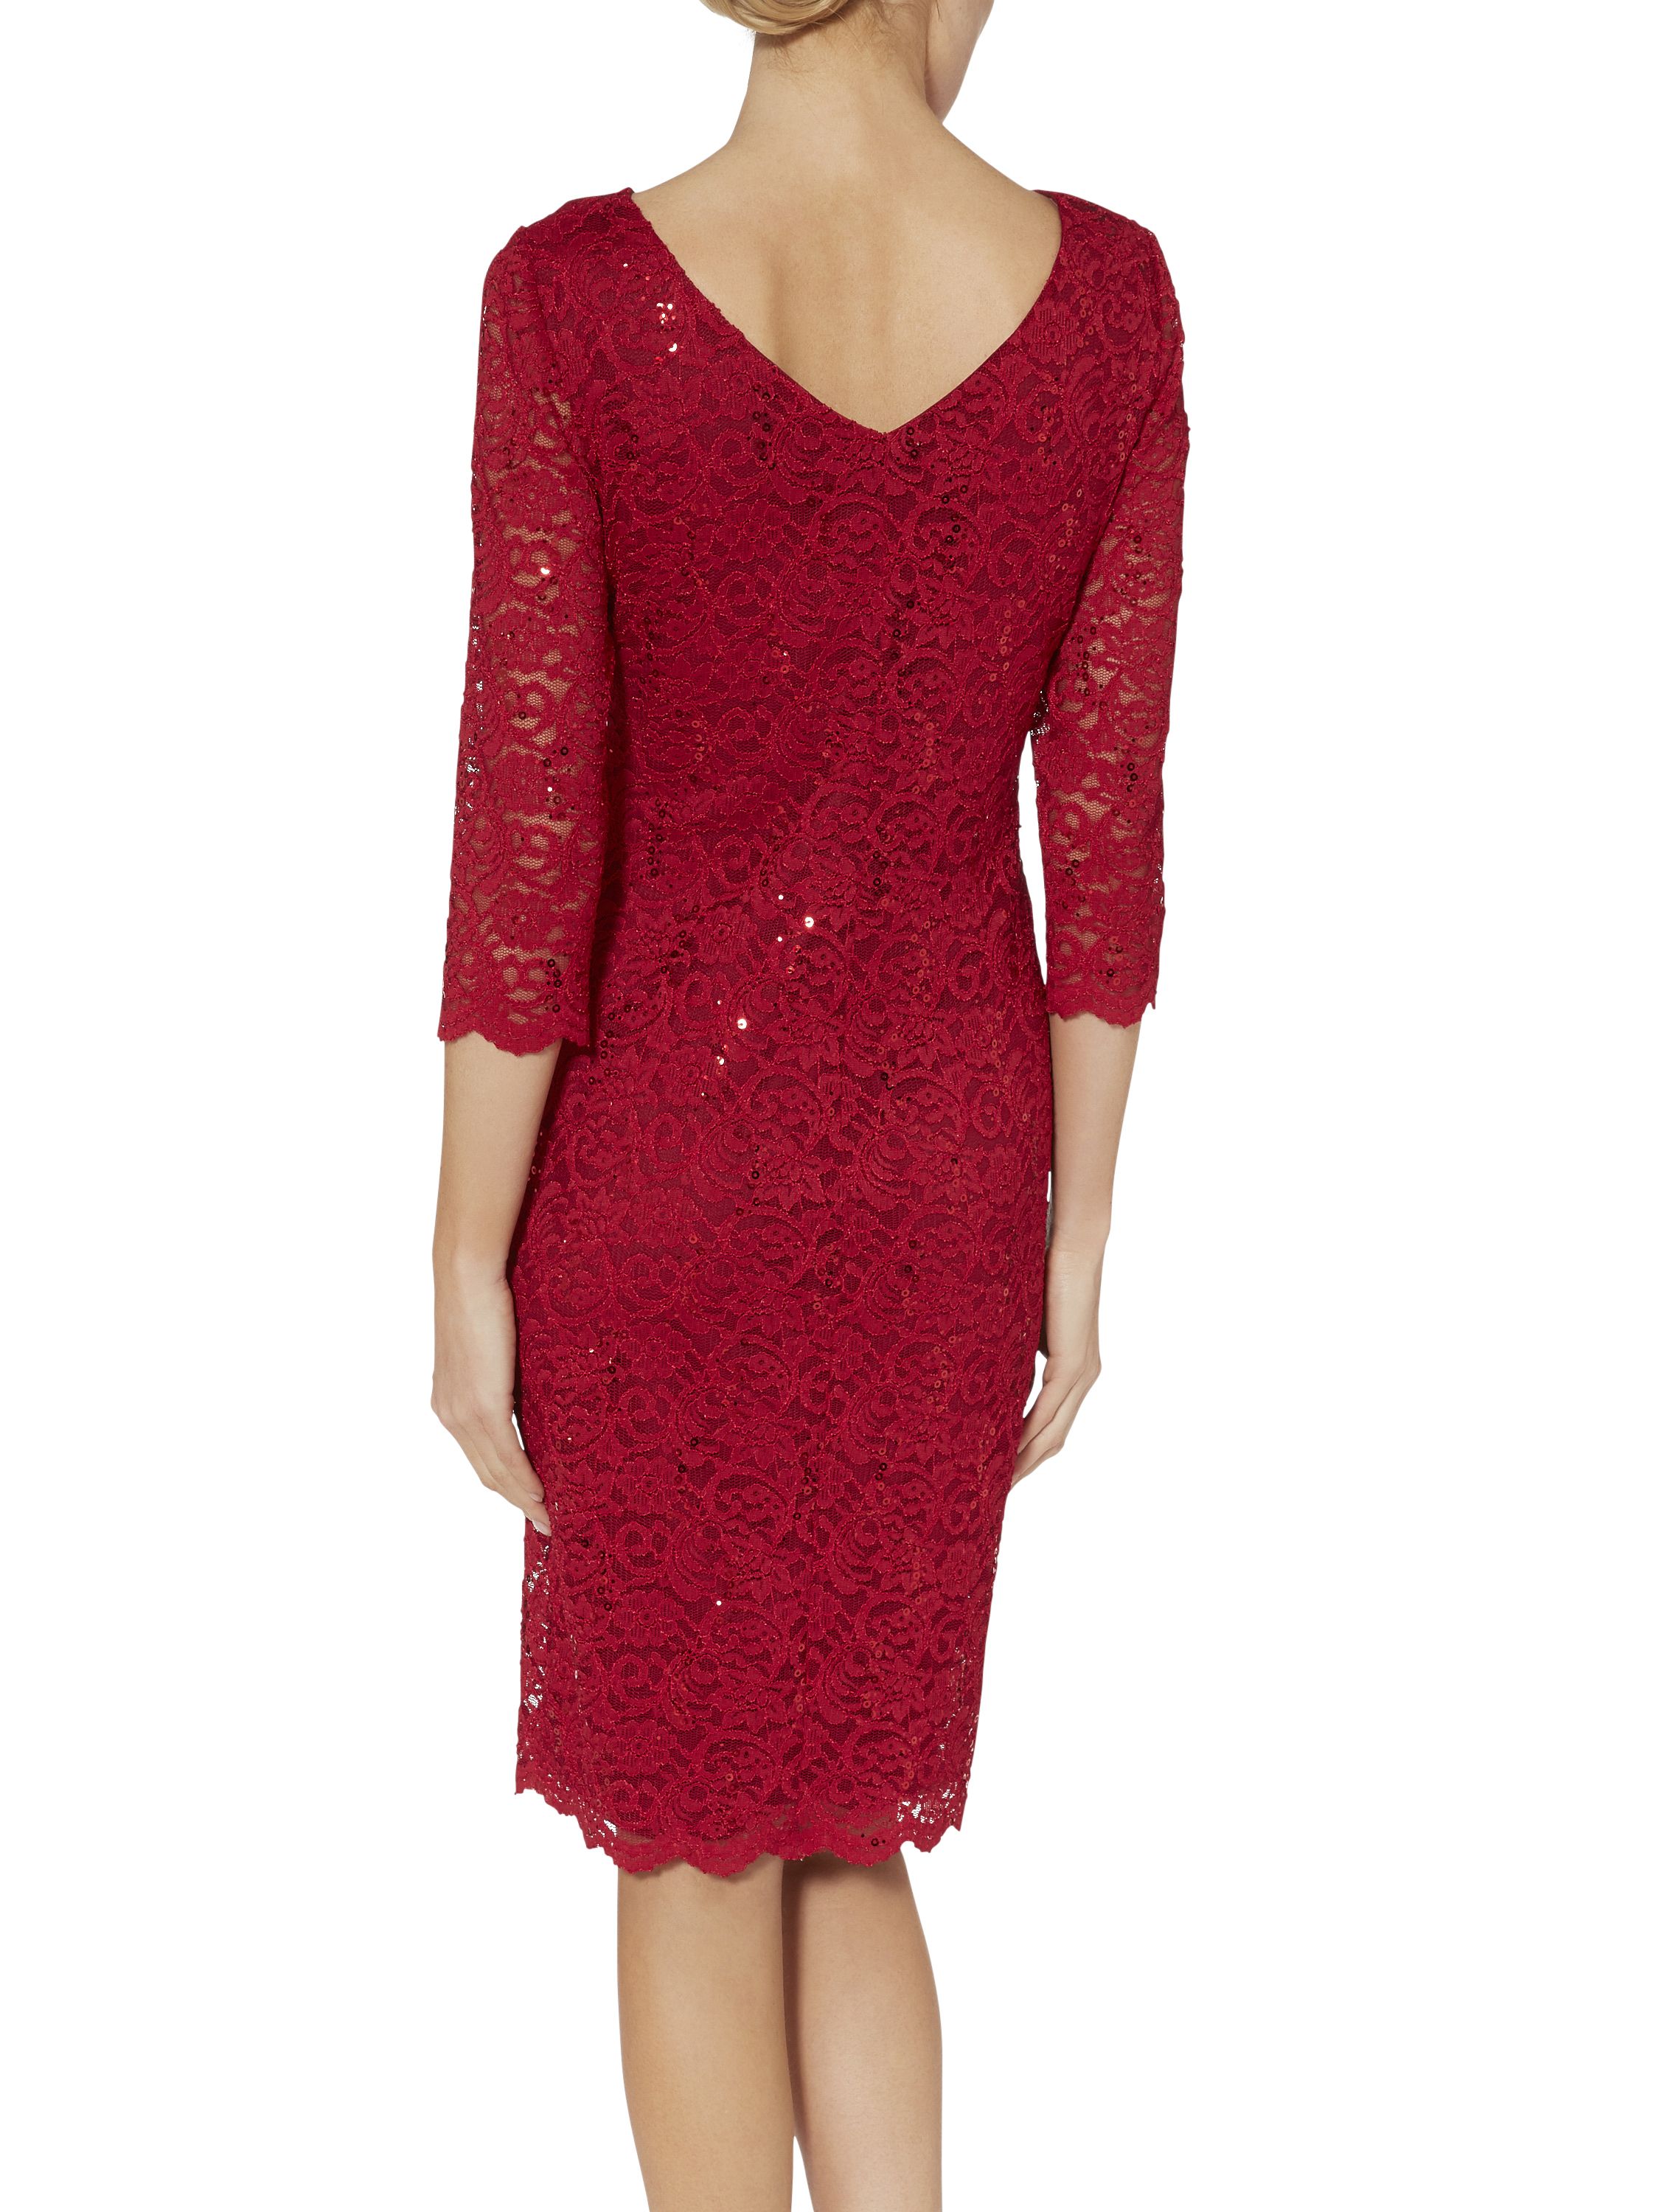 Look dazzling in this beautiful dress by Gina Bacconi. Crafted in a stretch sequin lace it features a wrap top bodice with a gathered side to create a flattering silhouette and a v shaped neckline front and back. This dress is lined with sheer sleeves with a scalloped hem and sleeve detail.